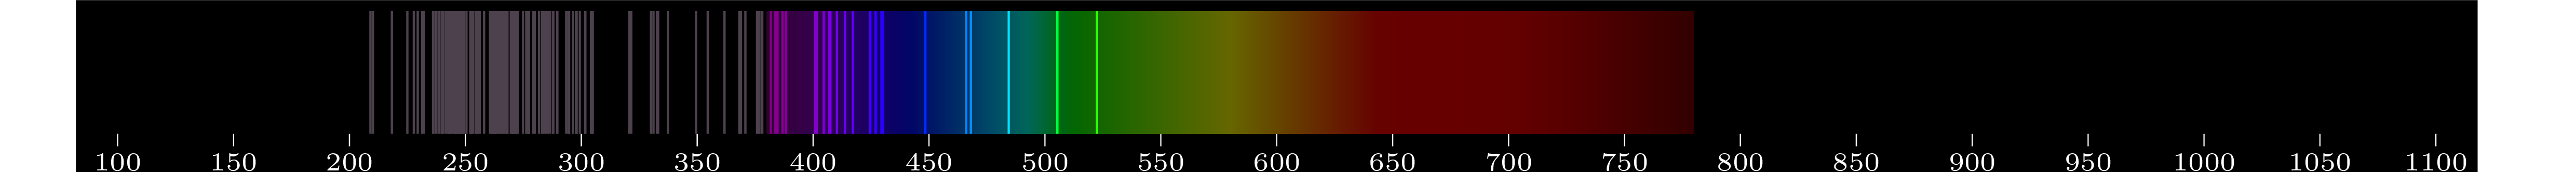 emmision spectra of element W